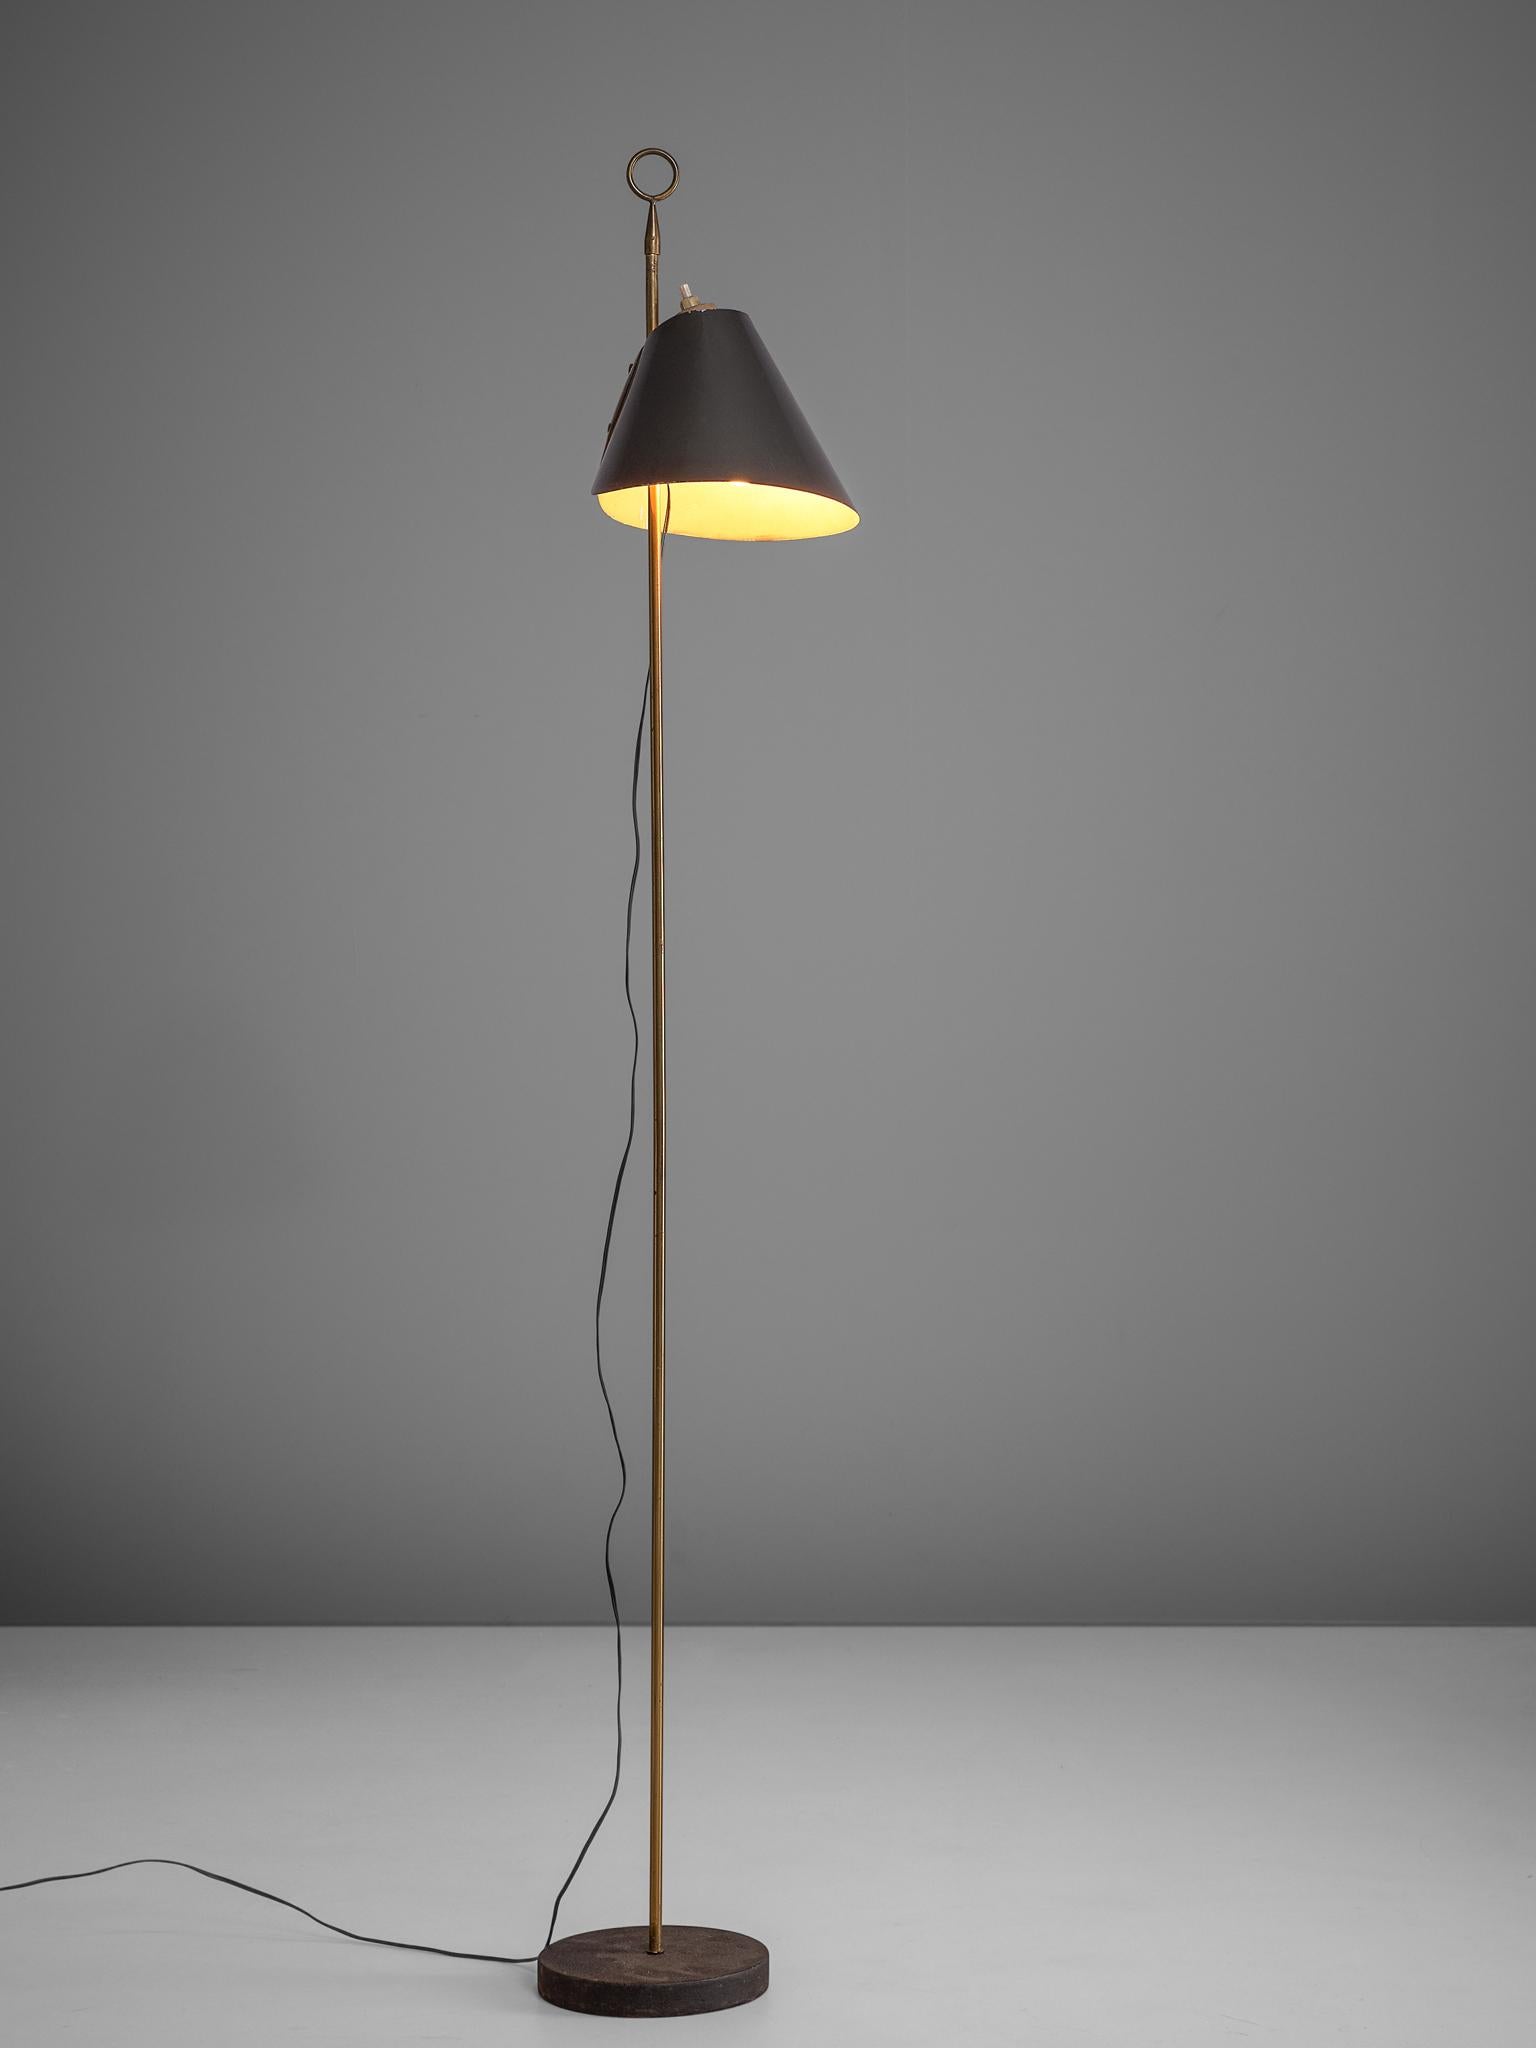 Floor lamp designed by Luigi Caccia Dominioni, Italy, 1950s.

This beautiful floor lamp designed Italian designer by Luigi Caccia Dominioni is called Monachella. The foot is made out of enameled cast iron which shows a beautiful contrast with its